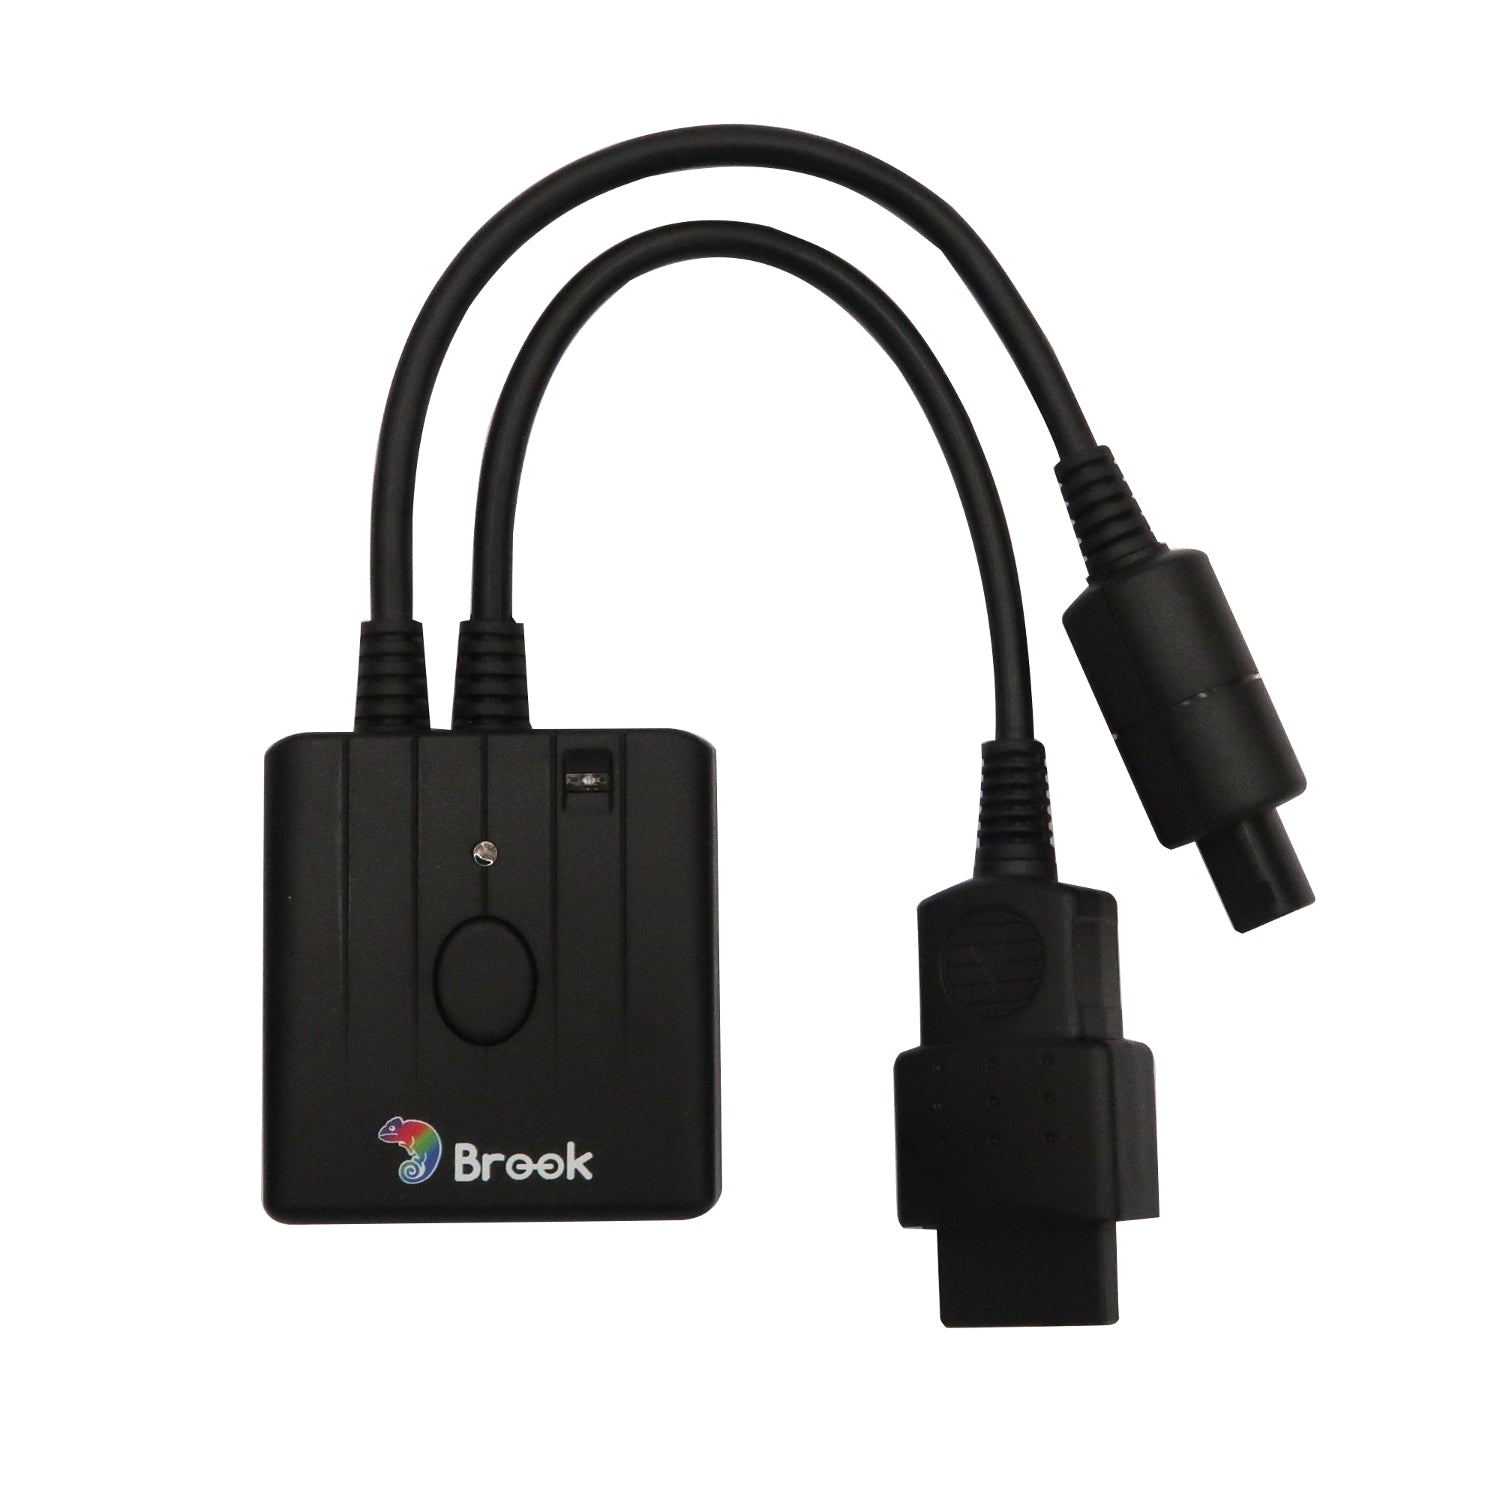 White Brook for PS4 usb Controller Adapter Converter Wired